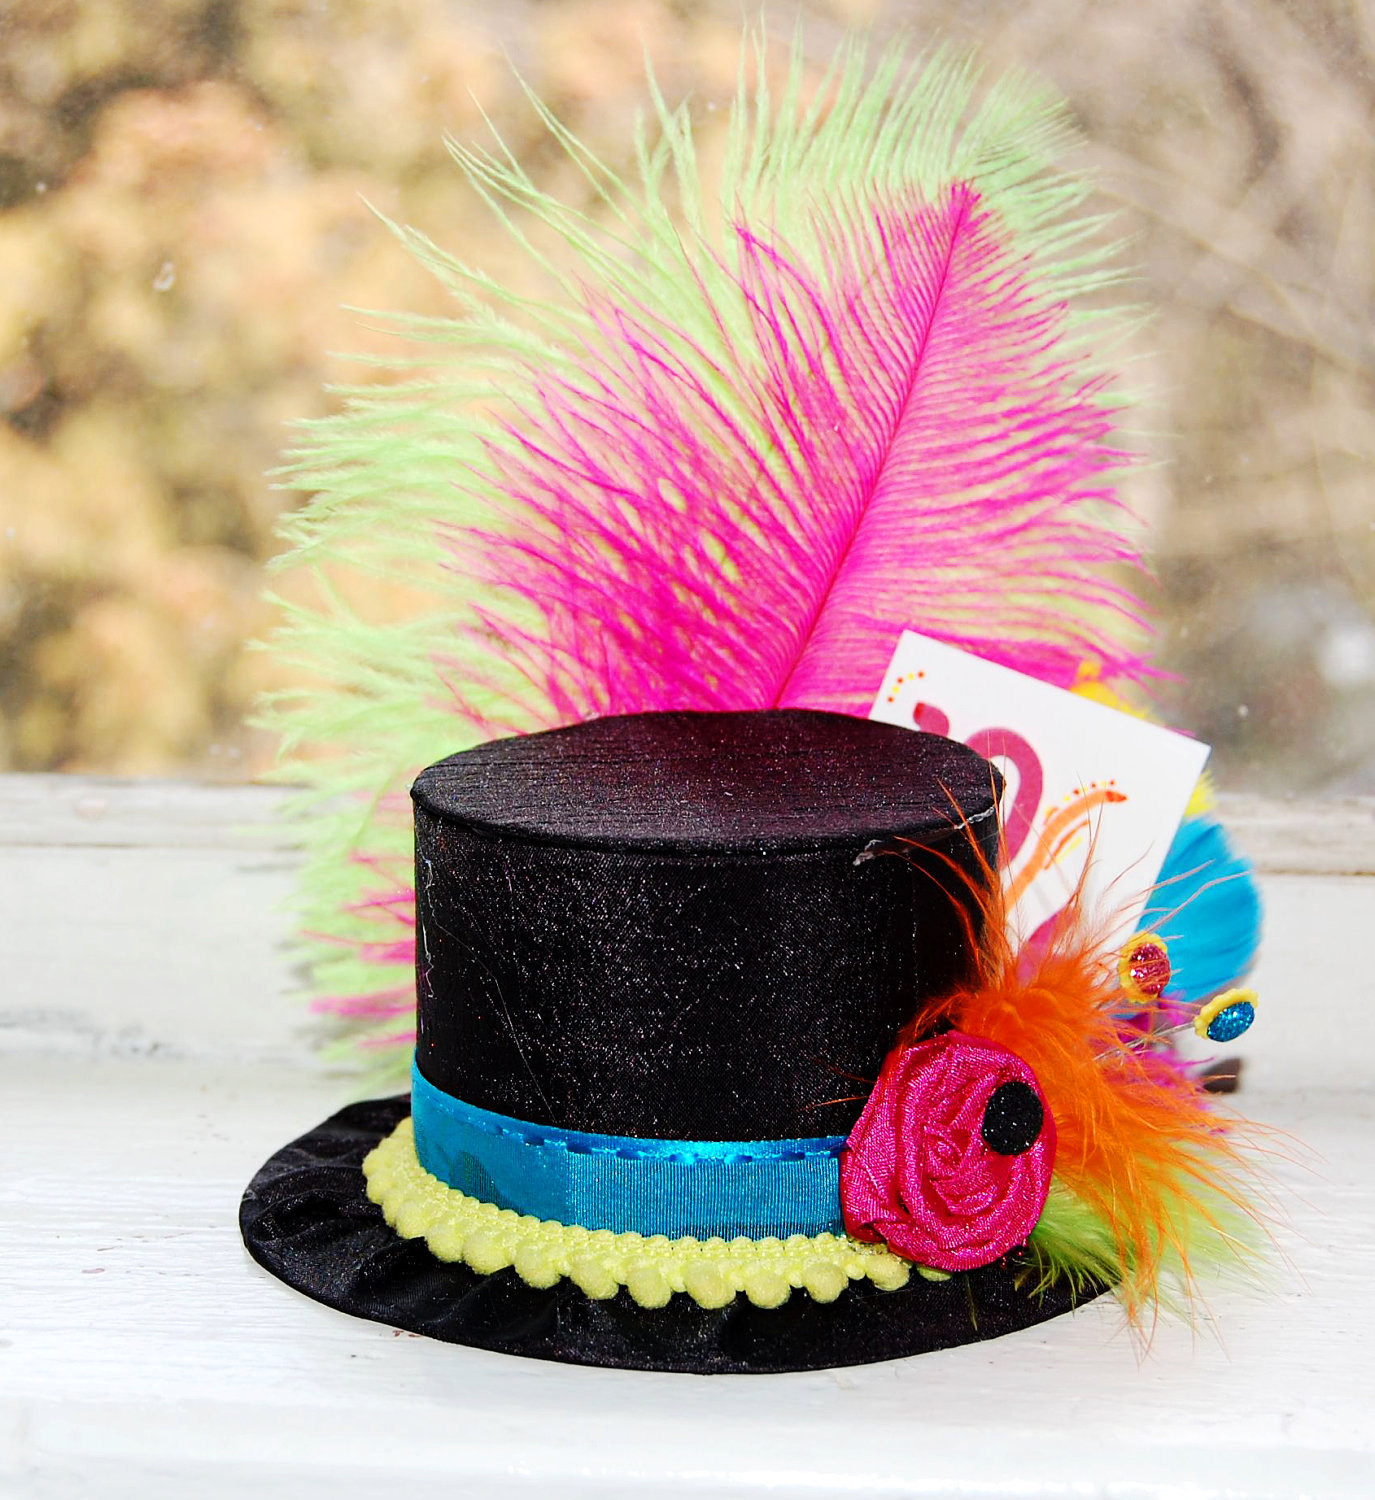 Mad Hatter Tea Party Hats Ideas
 Mad Hatter Mini Top Hat in NEON colors Alice in Wonderland